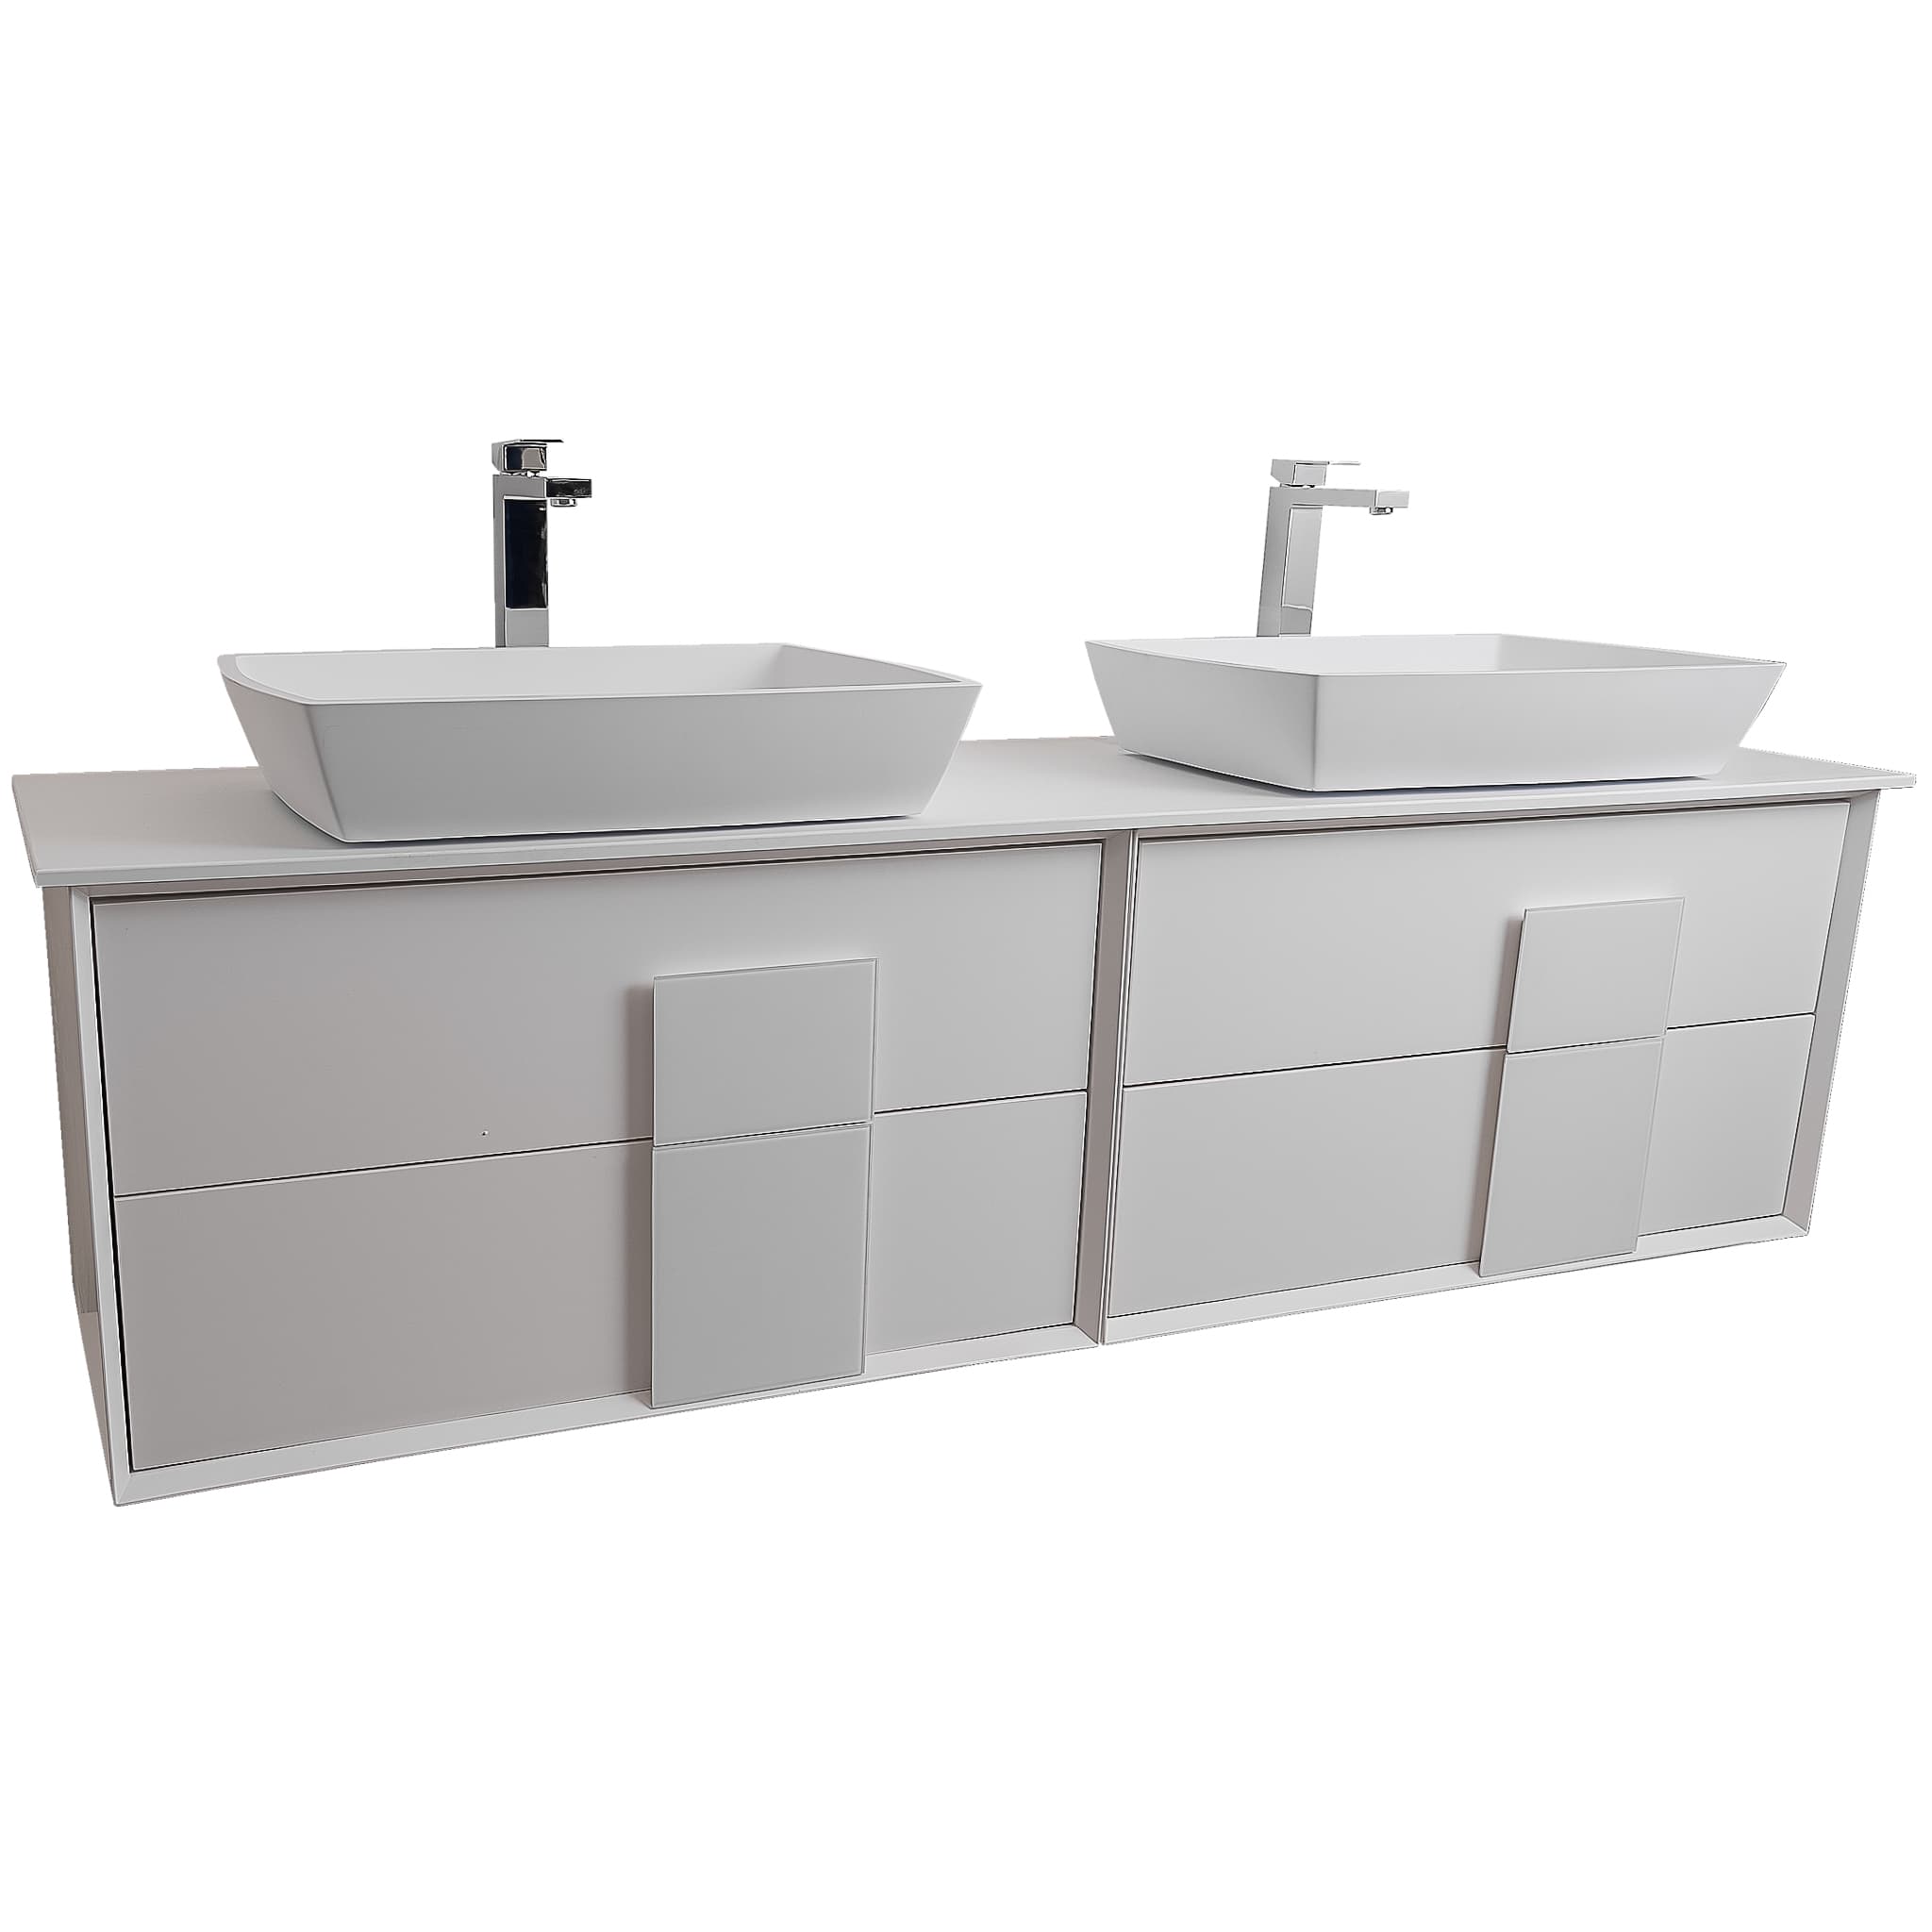 Piazza 63 Matte White With White Handle Cabinet, Solid Surface Flat White Counter and Two Square Solid Surface White Basin 1316, Wall Mounted Modern Vanity Set